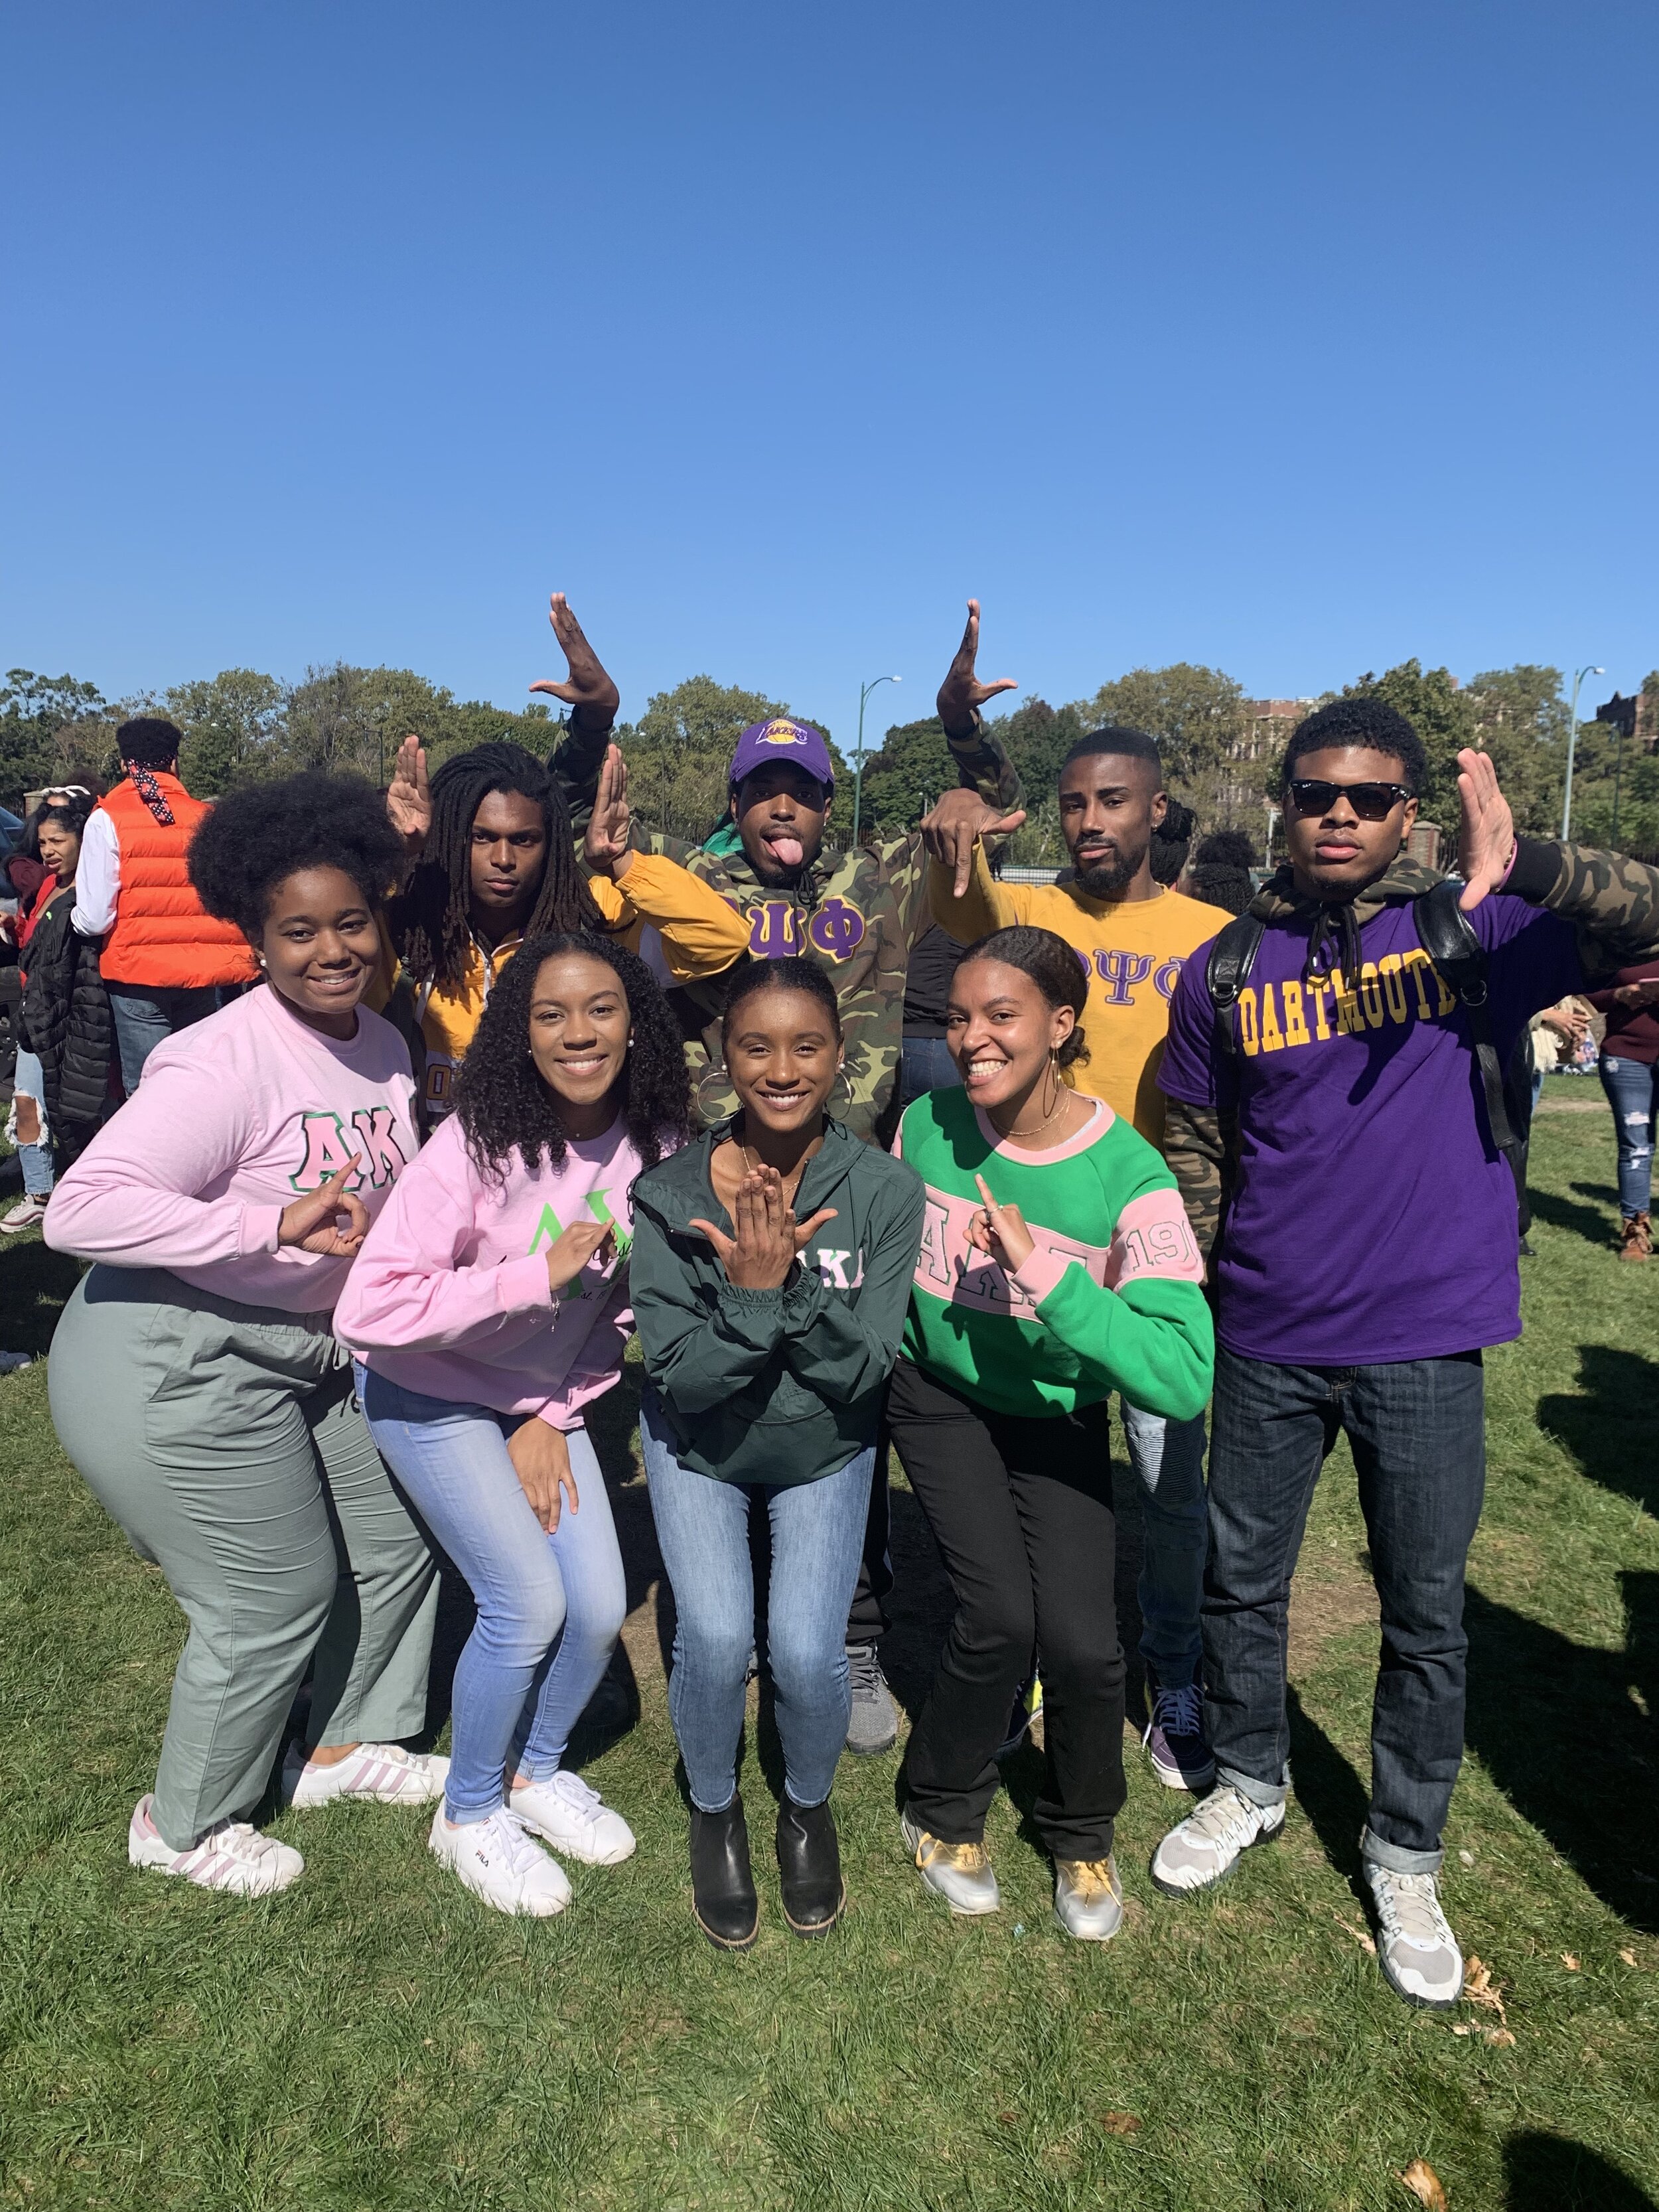 Tailgating Event with the Gamma Chapter of Omega Psi Phi Fraternity, Inc.